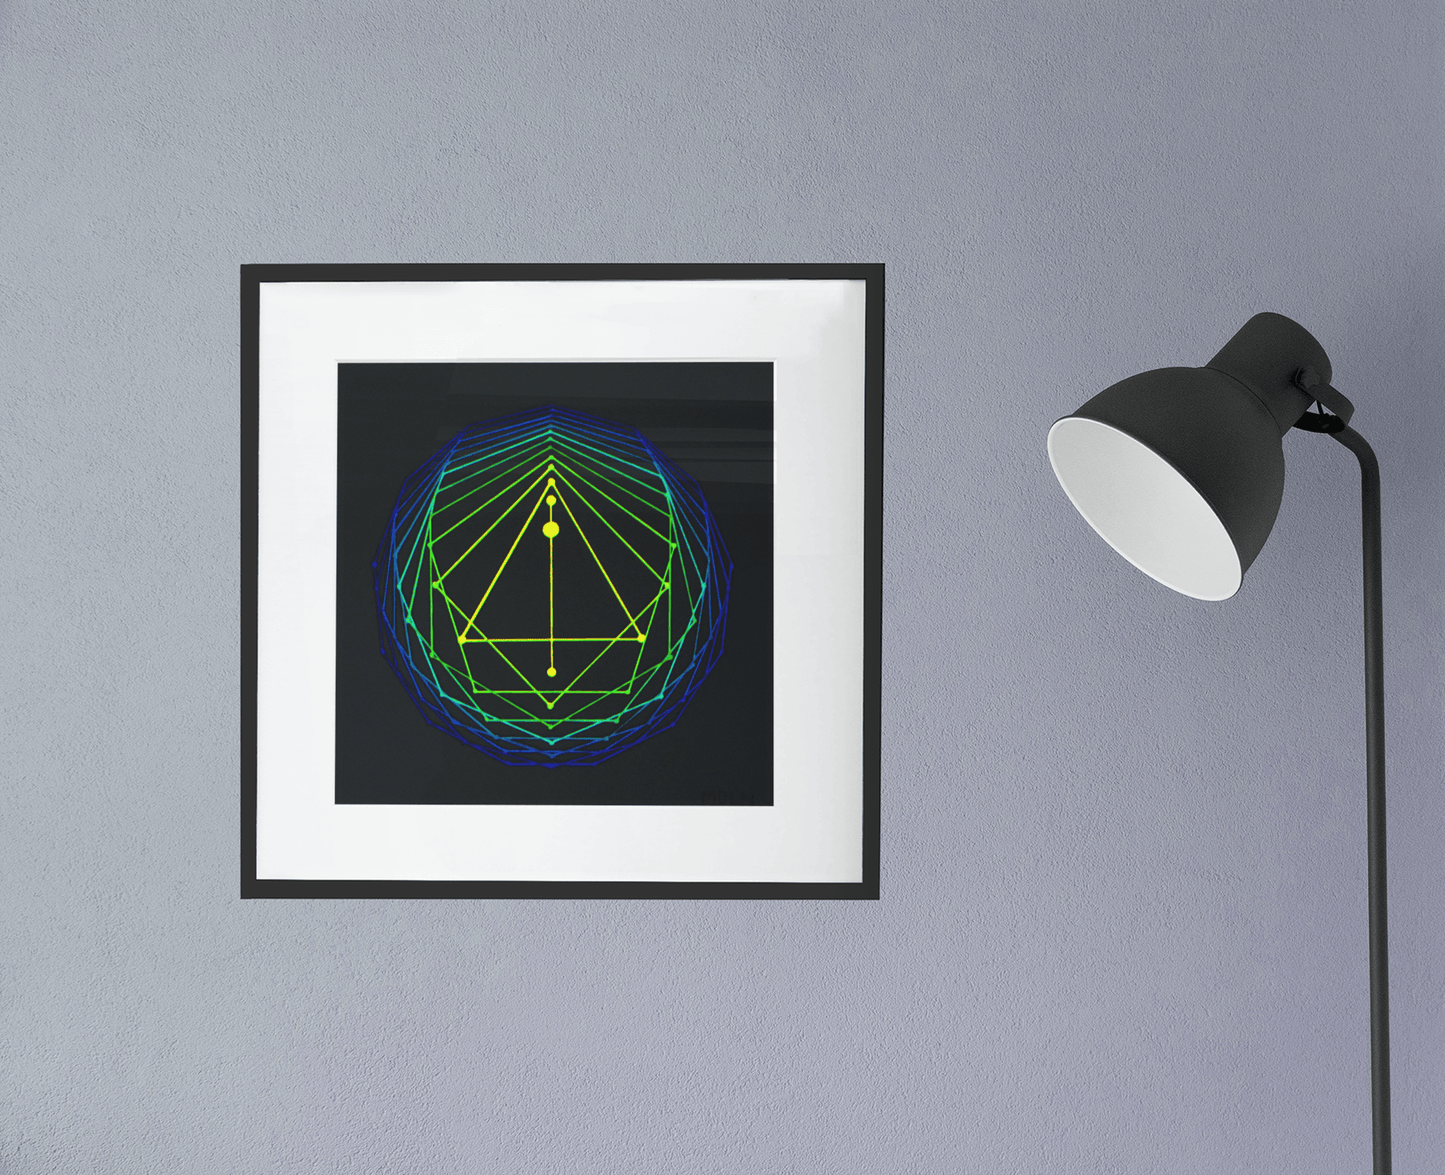 Giclee art print of an original acrylic painting of sacred geometry in blue/green/yellow tones, framed, hanging on a wall next to a lamp'